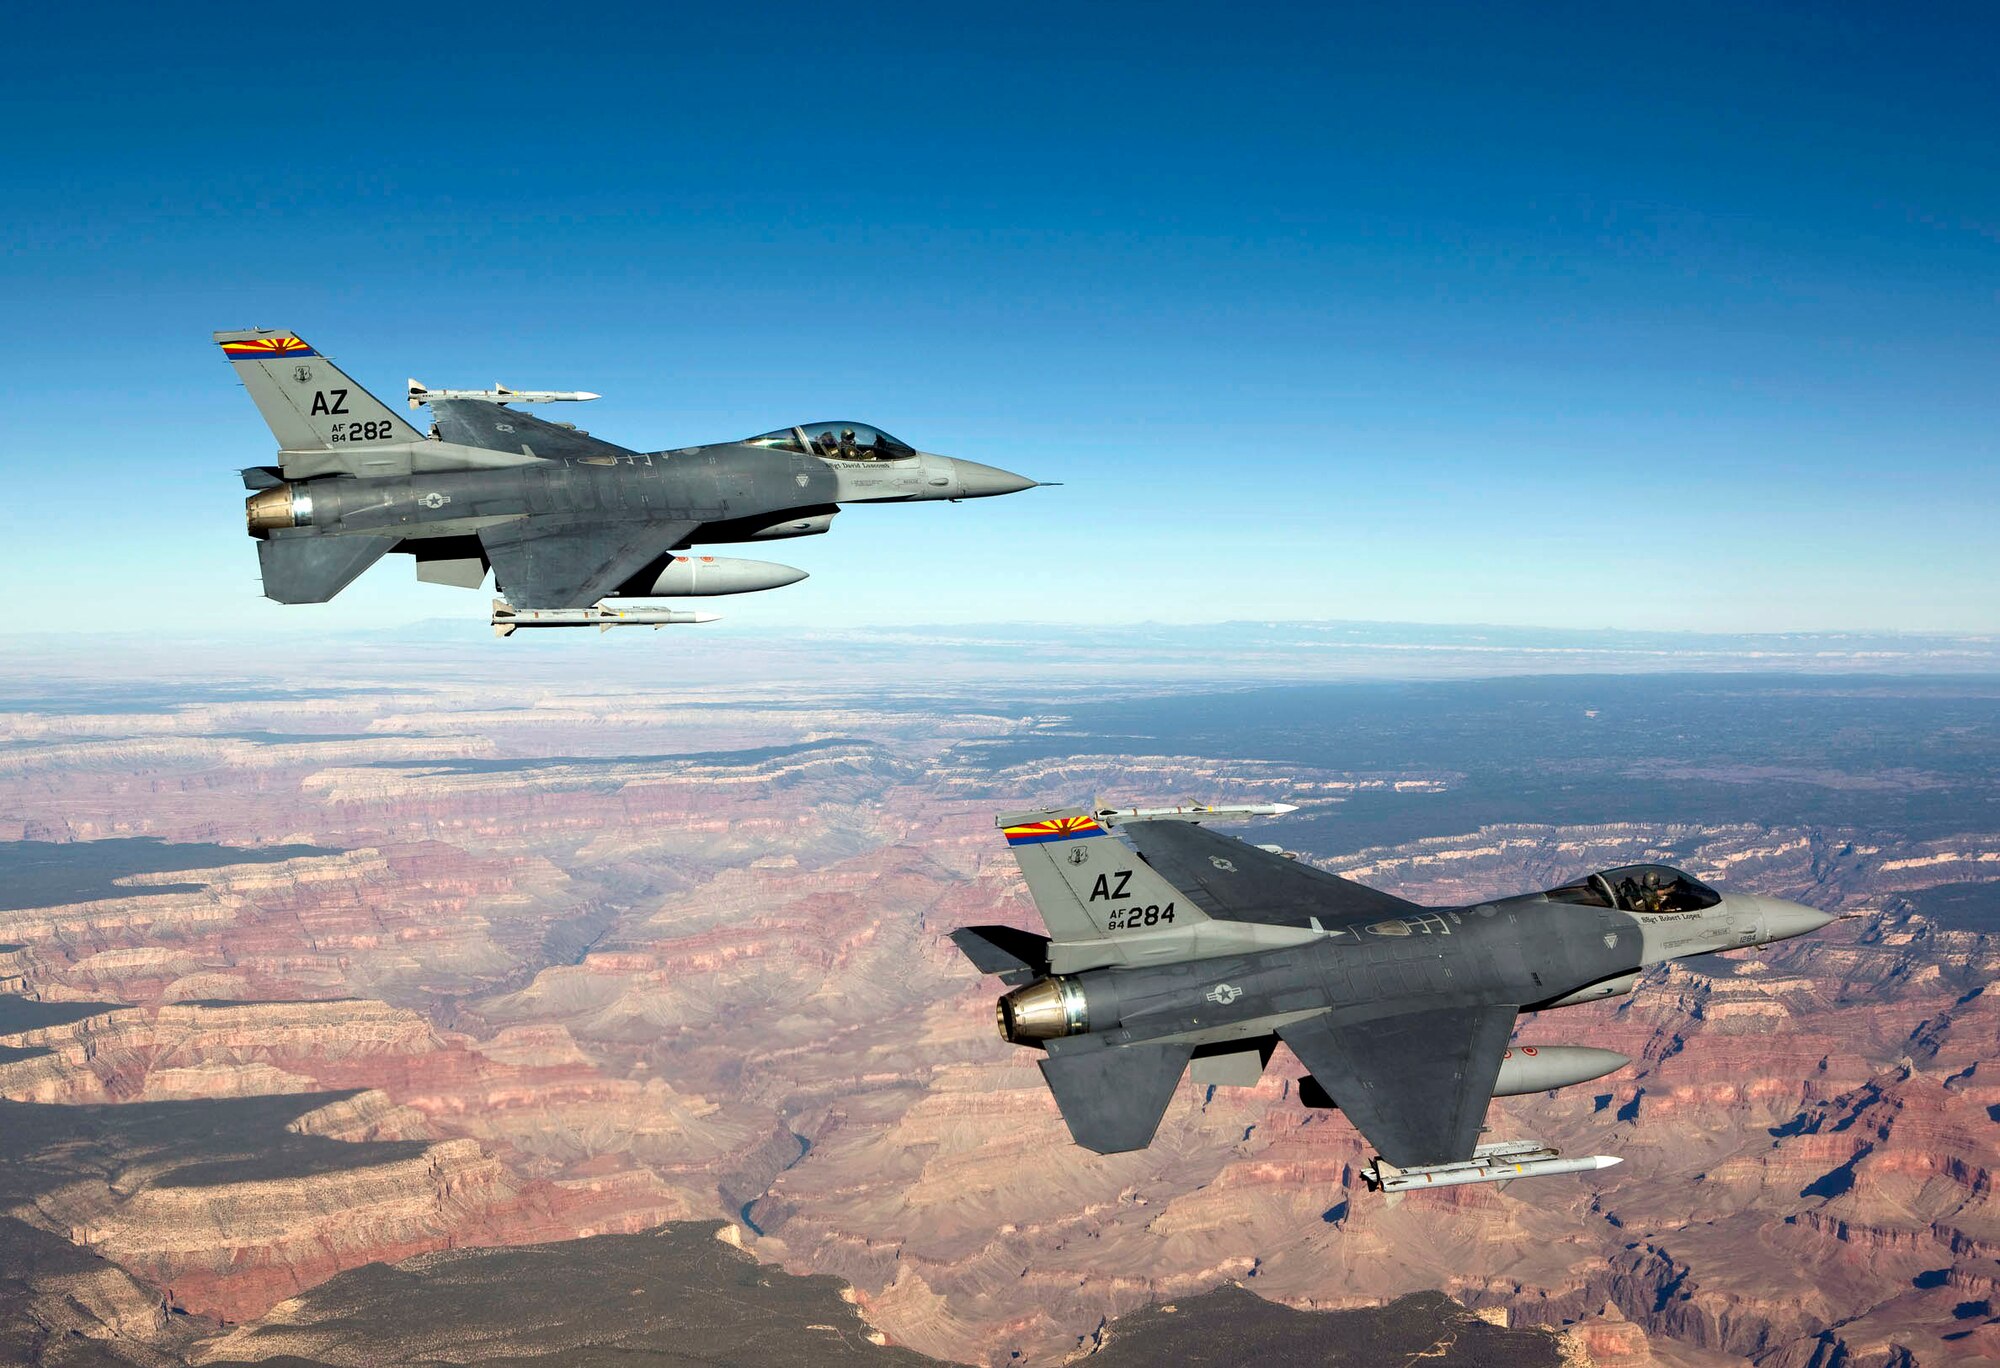 Capt. Bob Peel, left, and Lt. Col. Tony Adamo, right, F-16 instructor pilots from the 162nd Fighter Wing, fly over the Grand Canyon while supporting Operation Noble Eagle’s air sovereignty alert mission. The Arizona Air National Guard alert unit recently earned the 2009 Air Sovereignty Alert Unit of the Year award. (Photo by James Haseltine, High-G Productions)